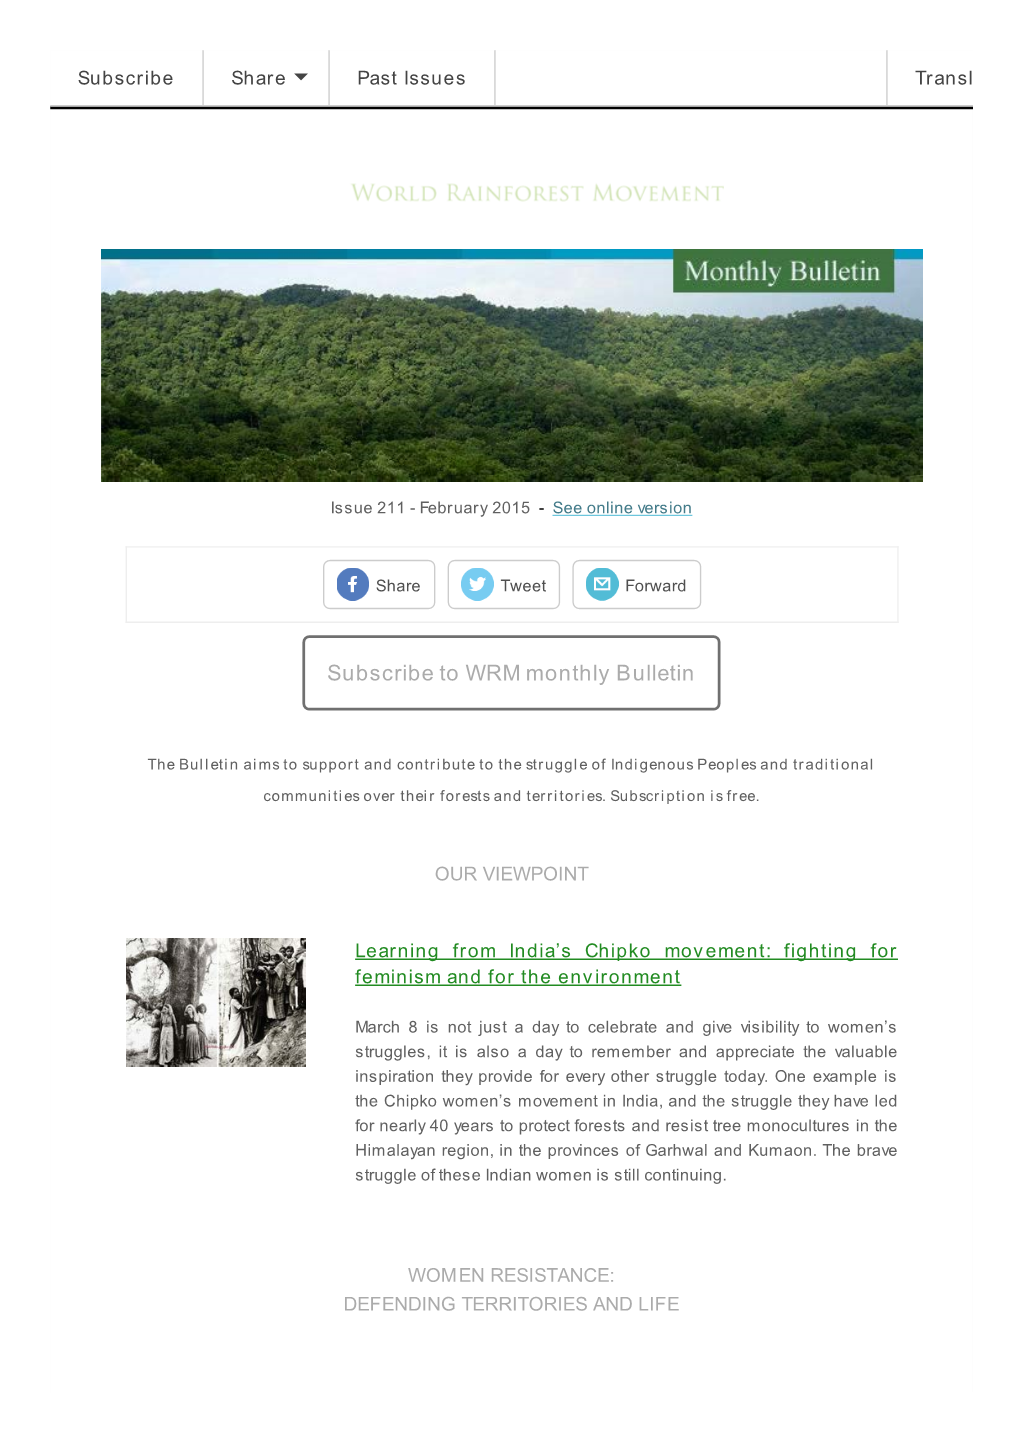 Subscribe to WRM Monthly Bulletin